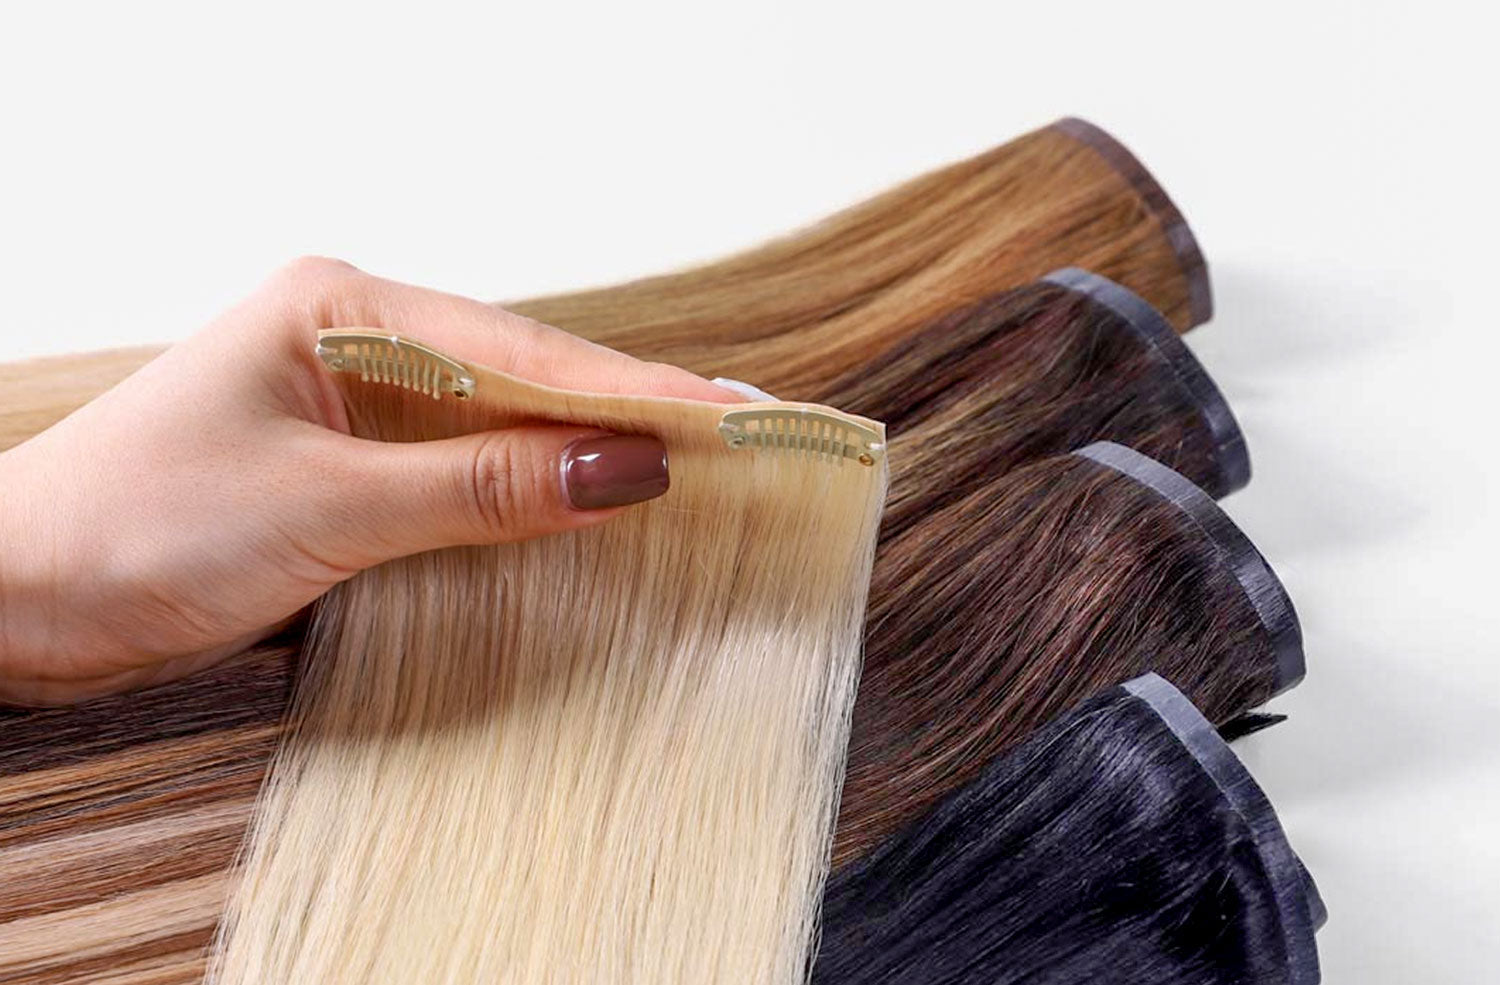 Seamless Clip-Ins VS Double Weft Clip-Ins: Pros & Cons